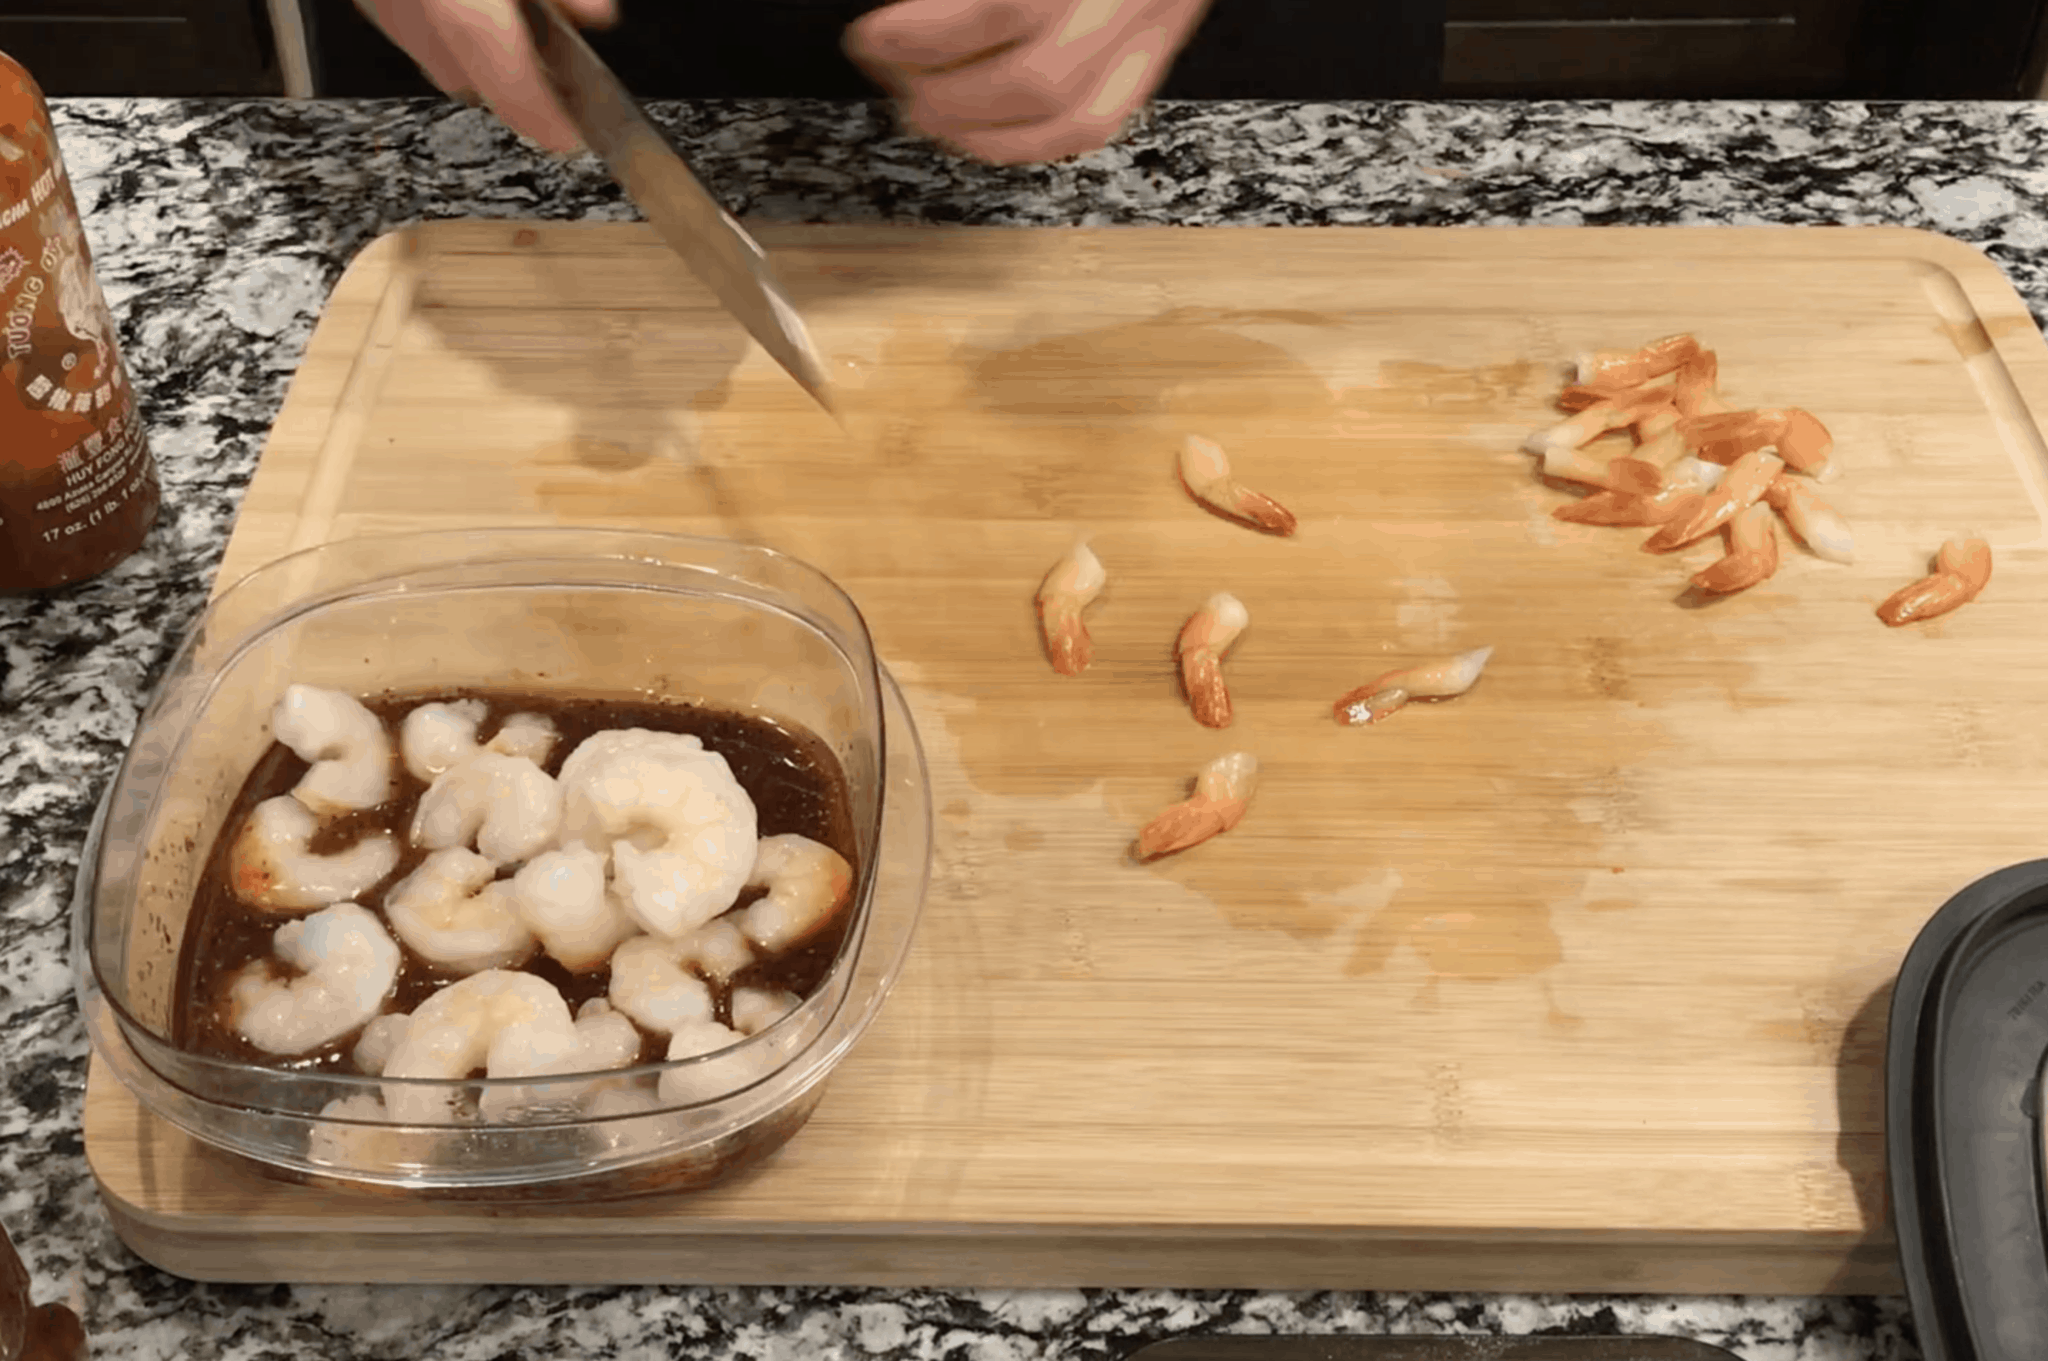 thaw and remove the tails from the shrimp